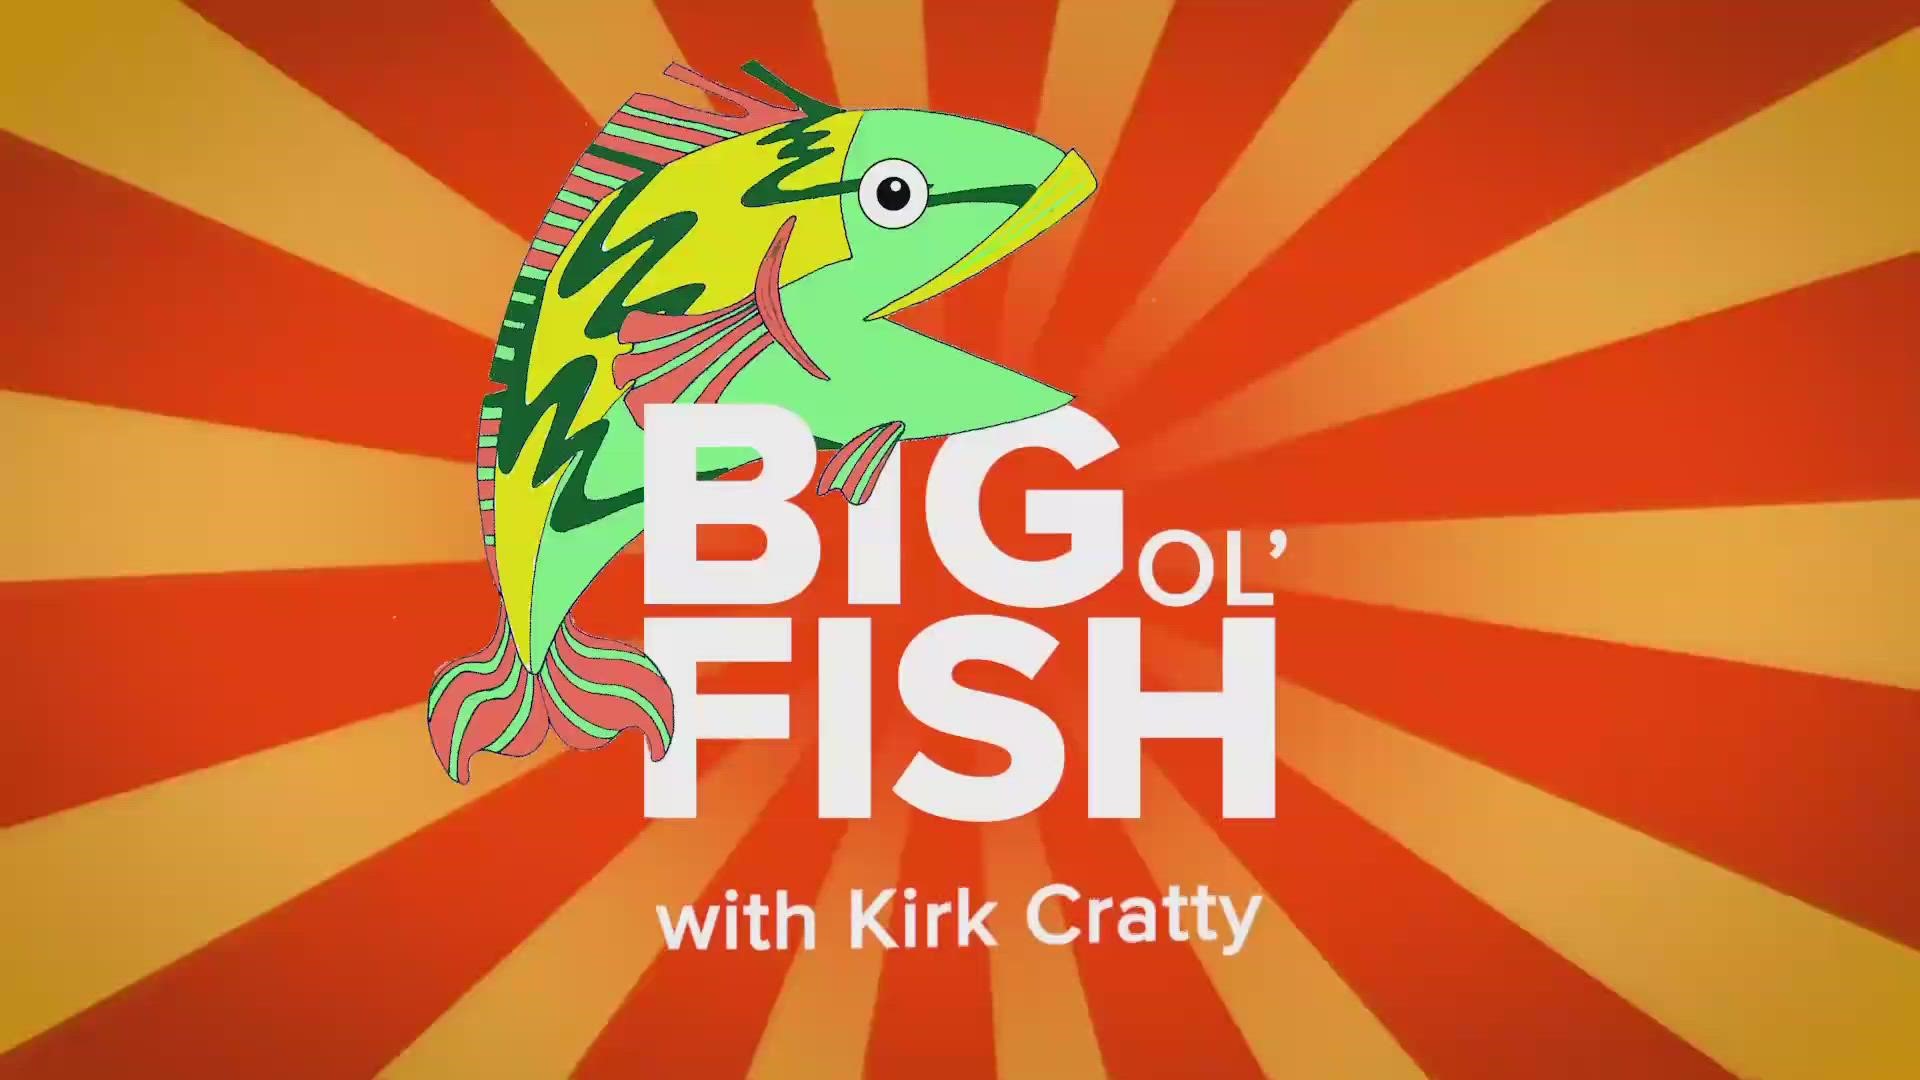 It's the Big Ol' Fish show with Kirk Cratty on Sunday, March 26, 2023.